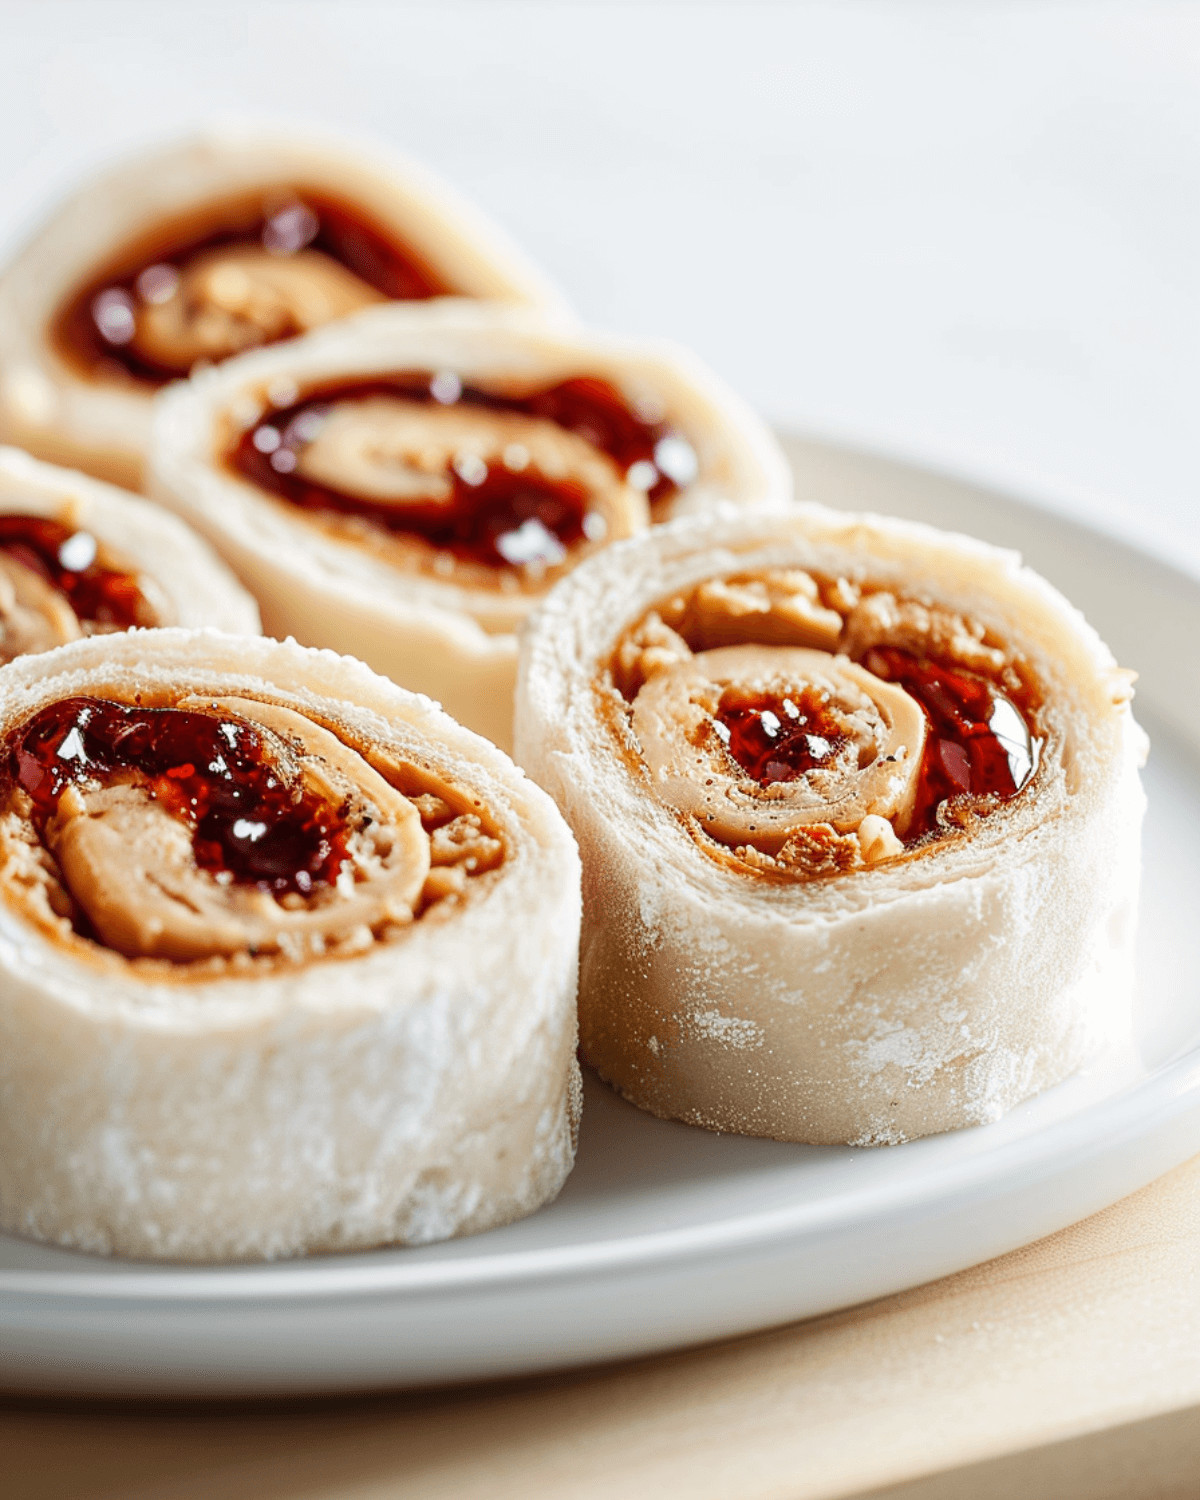 A plate of Peanut Butter and Jelly Pinwheel Sandwiches on a table.